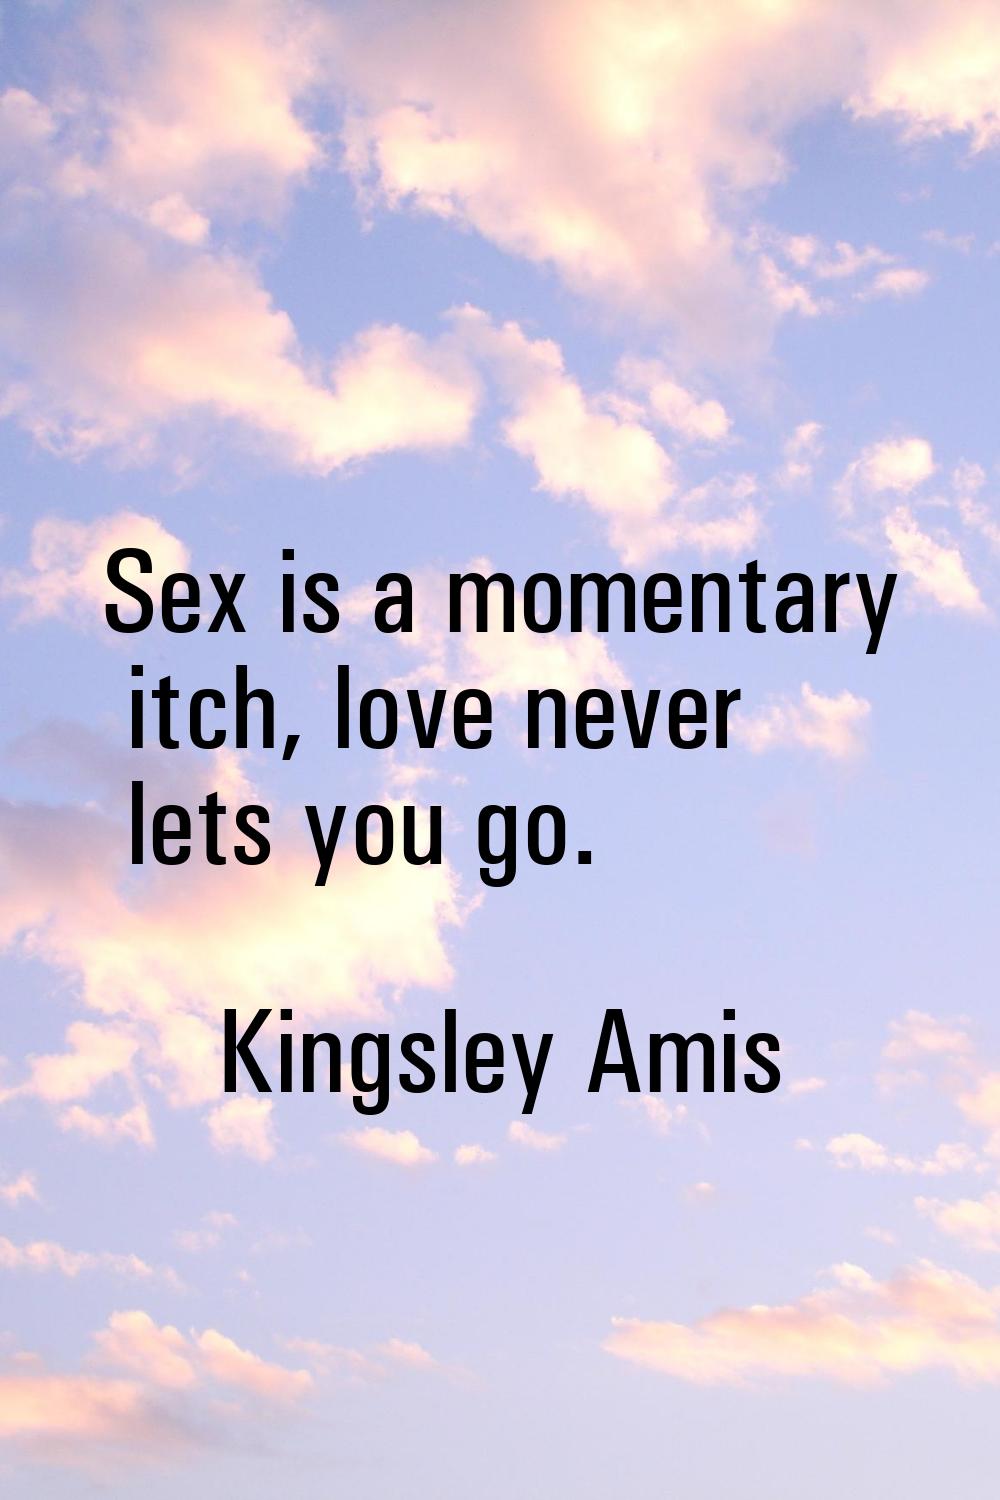 Sex is a momentary itch, love never lets you go.